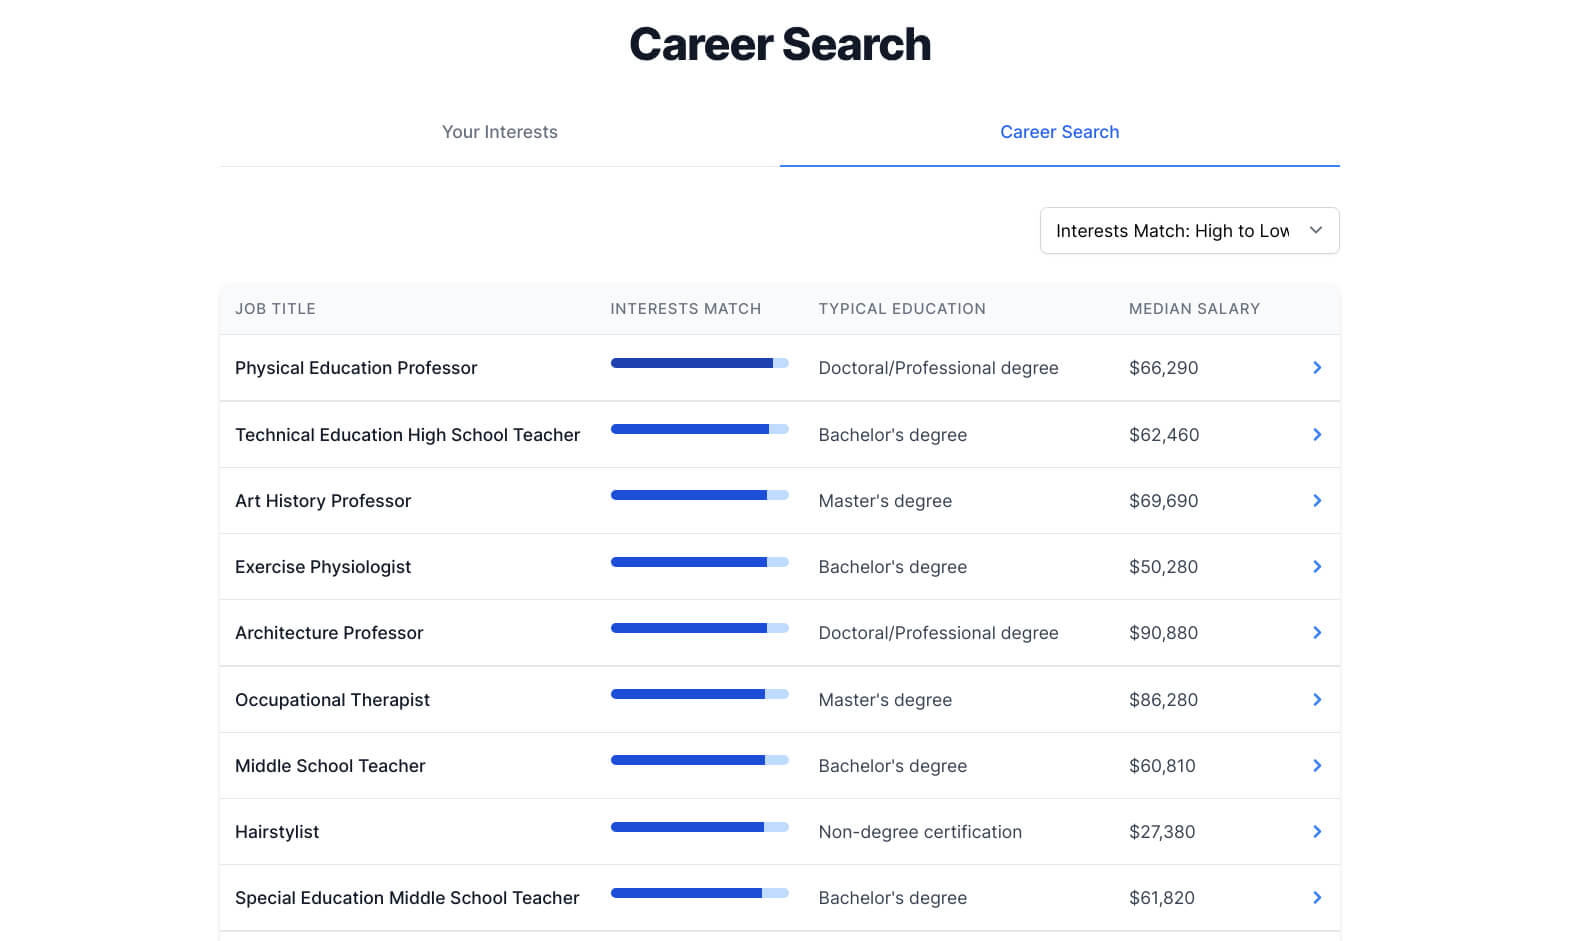 Example of the career search results